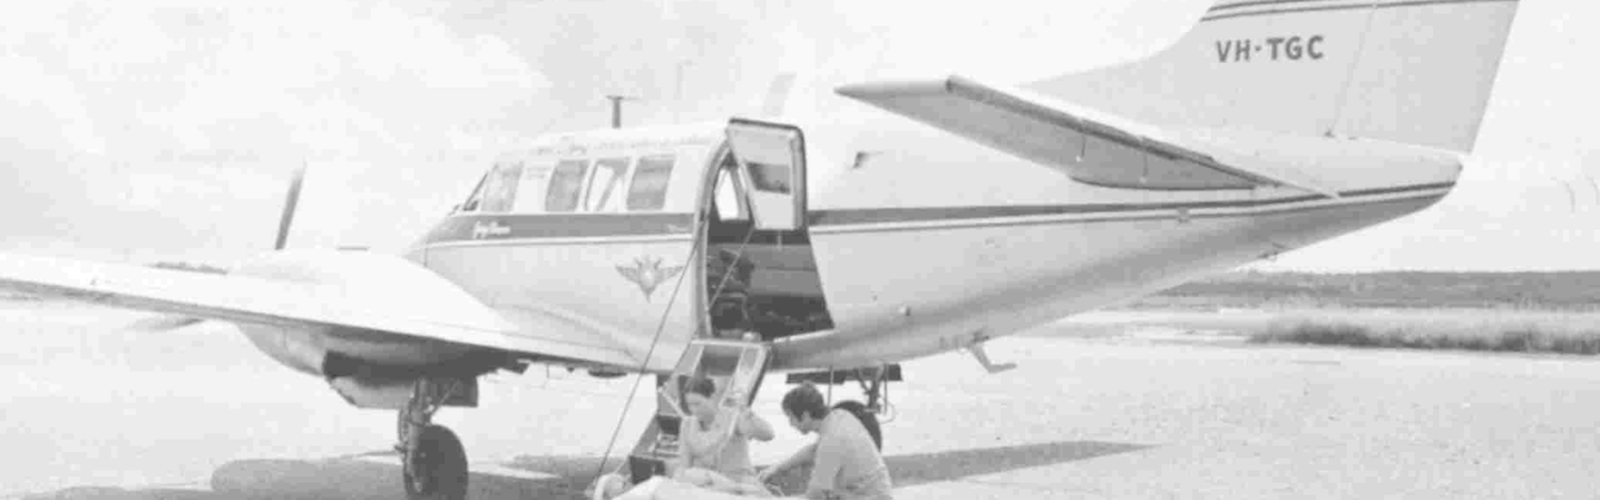 A black and white photo showing an old RFDS aircraft with a doctor tending to a patient in the foreground